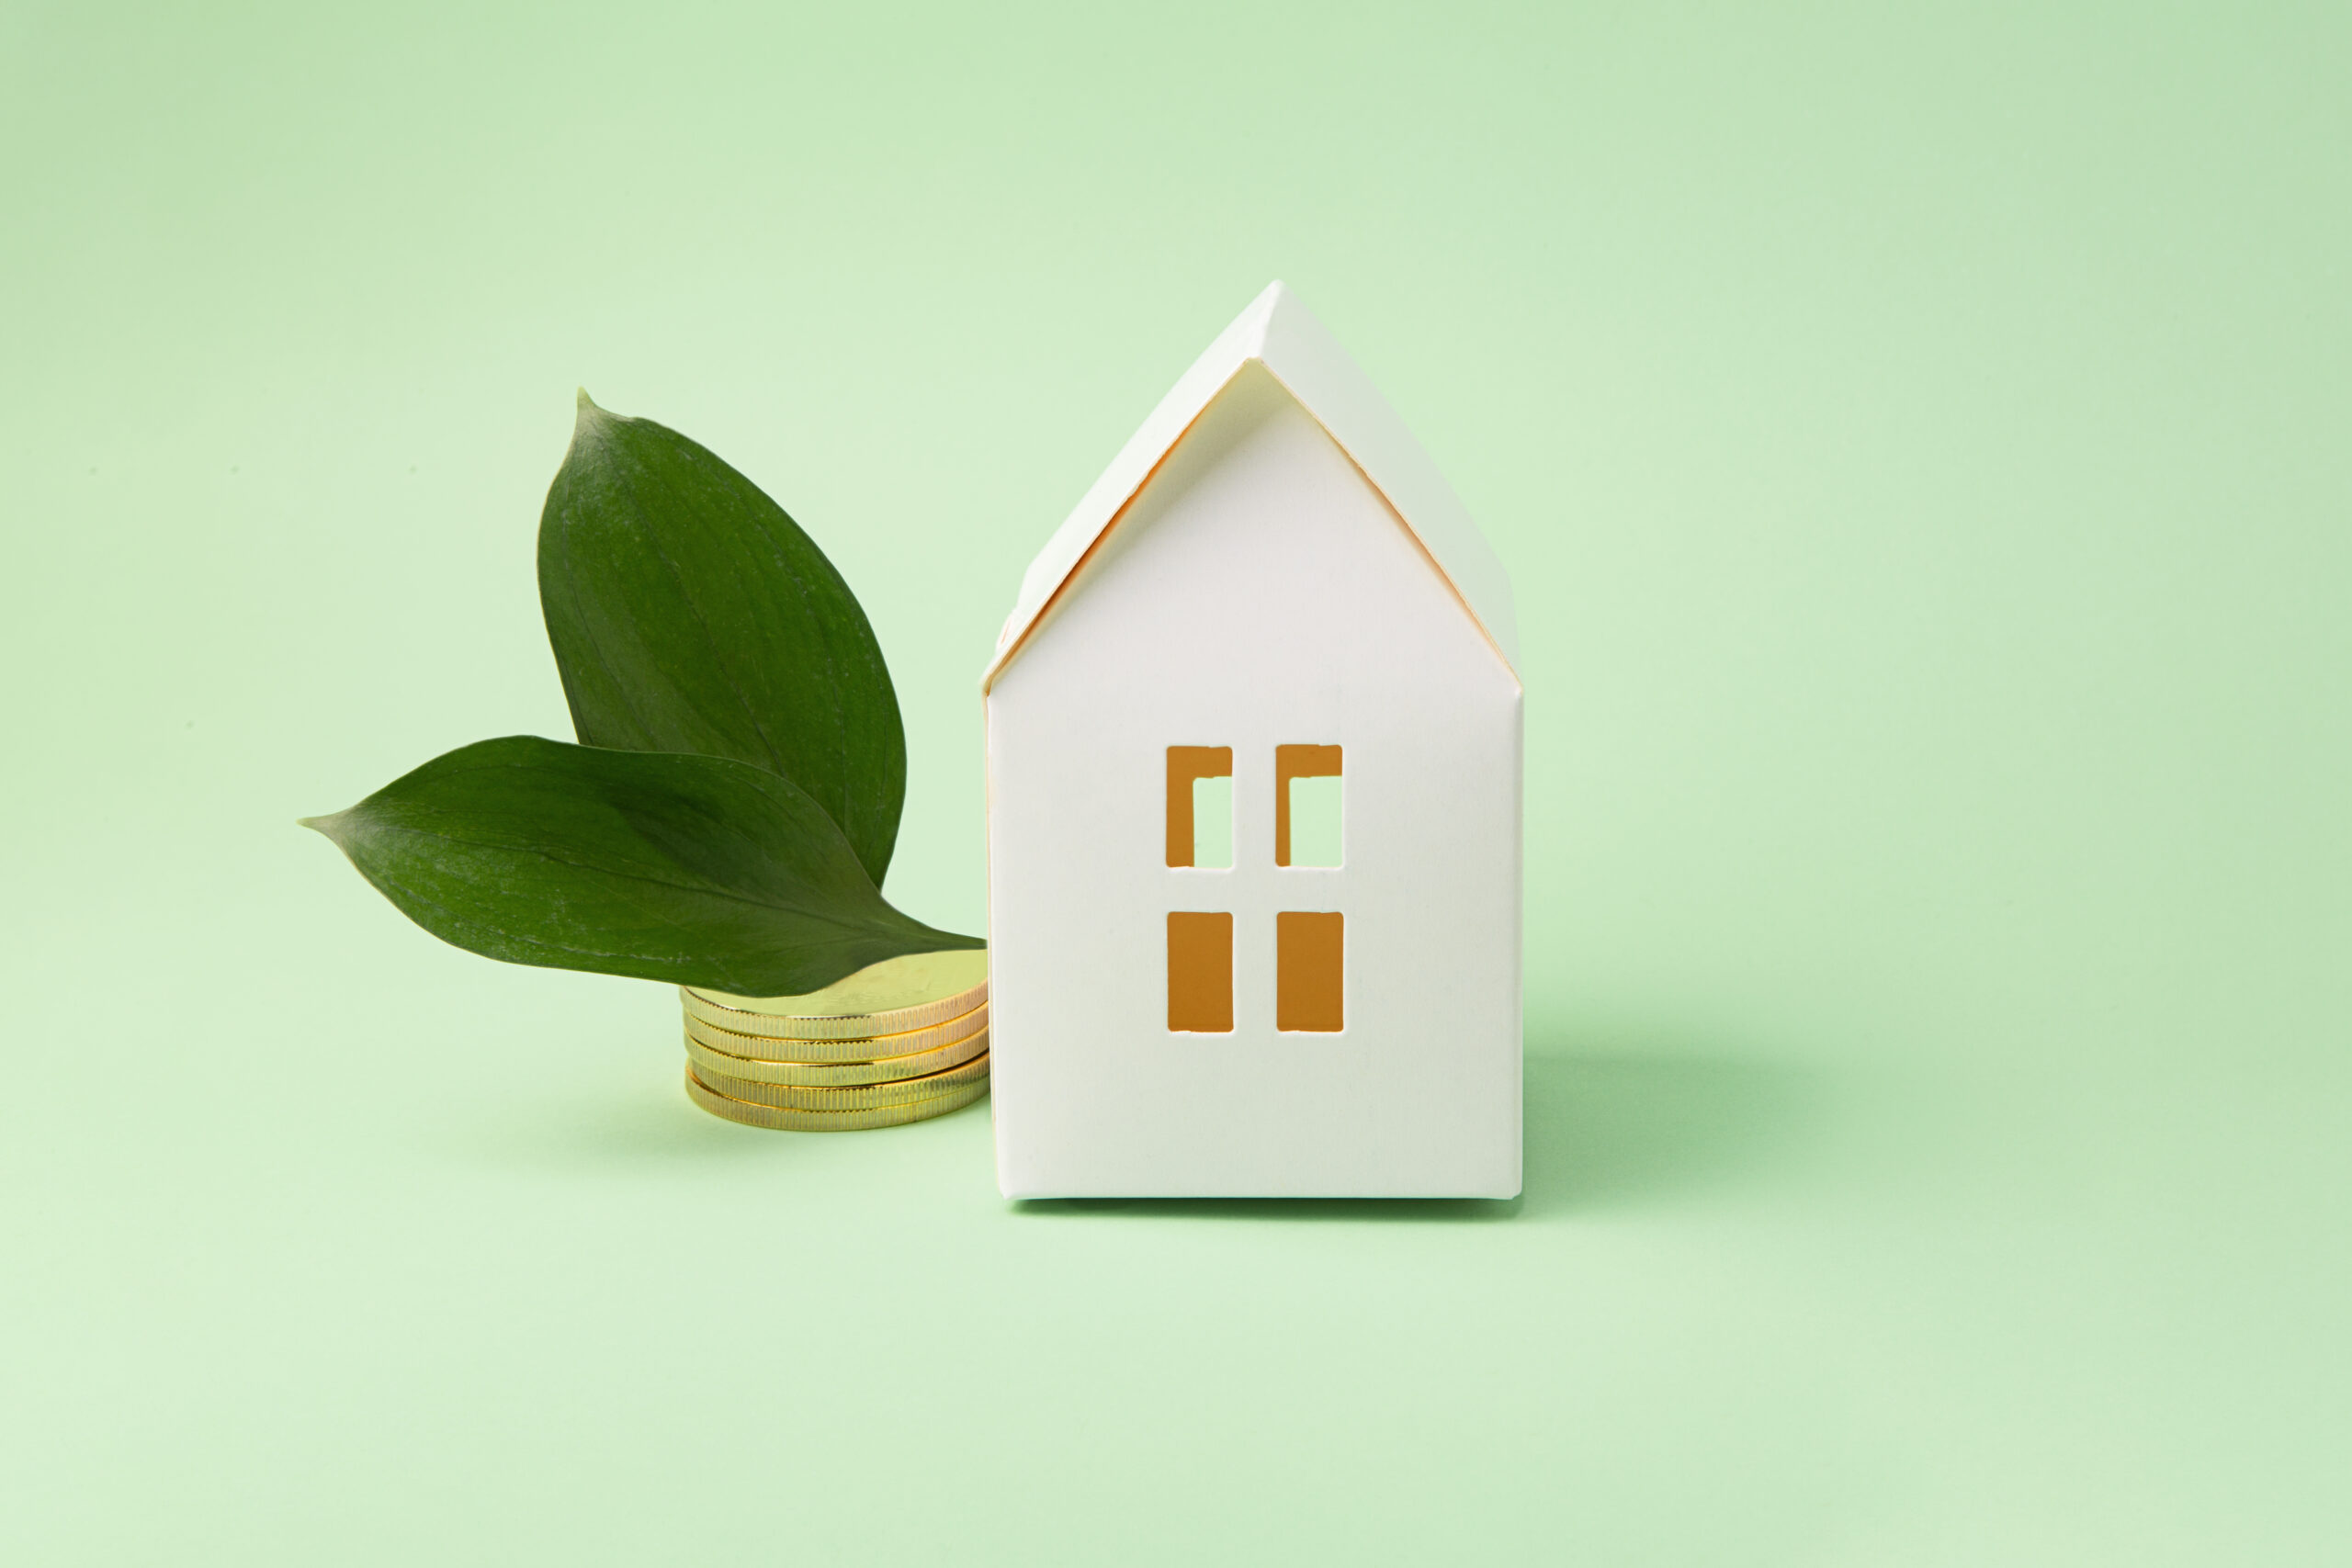 Concept of green tax credit - little house with coins near it and green leafs.